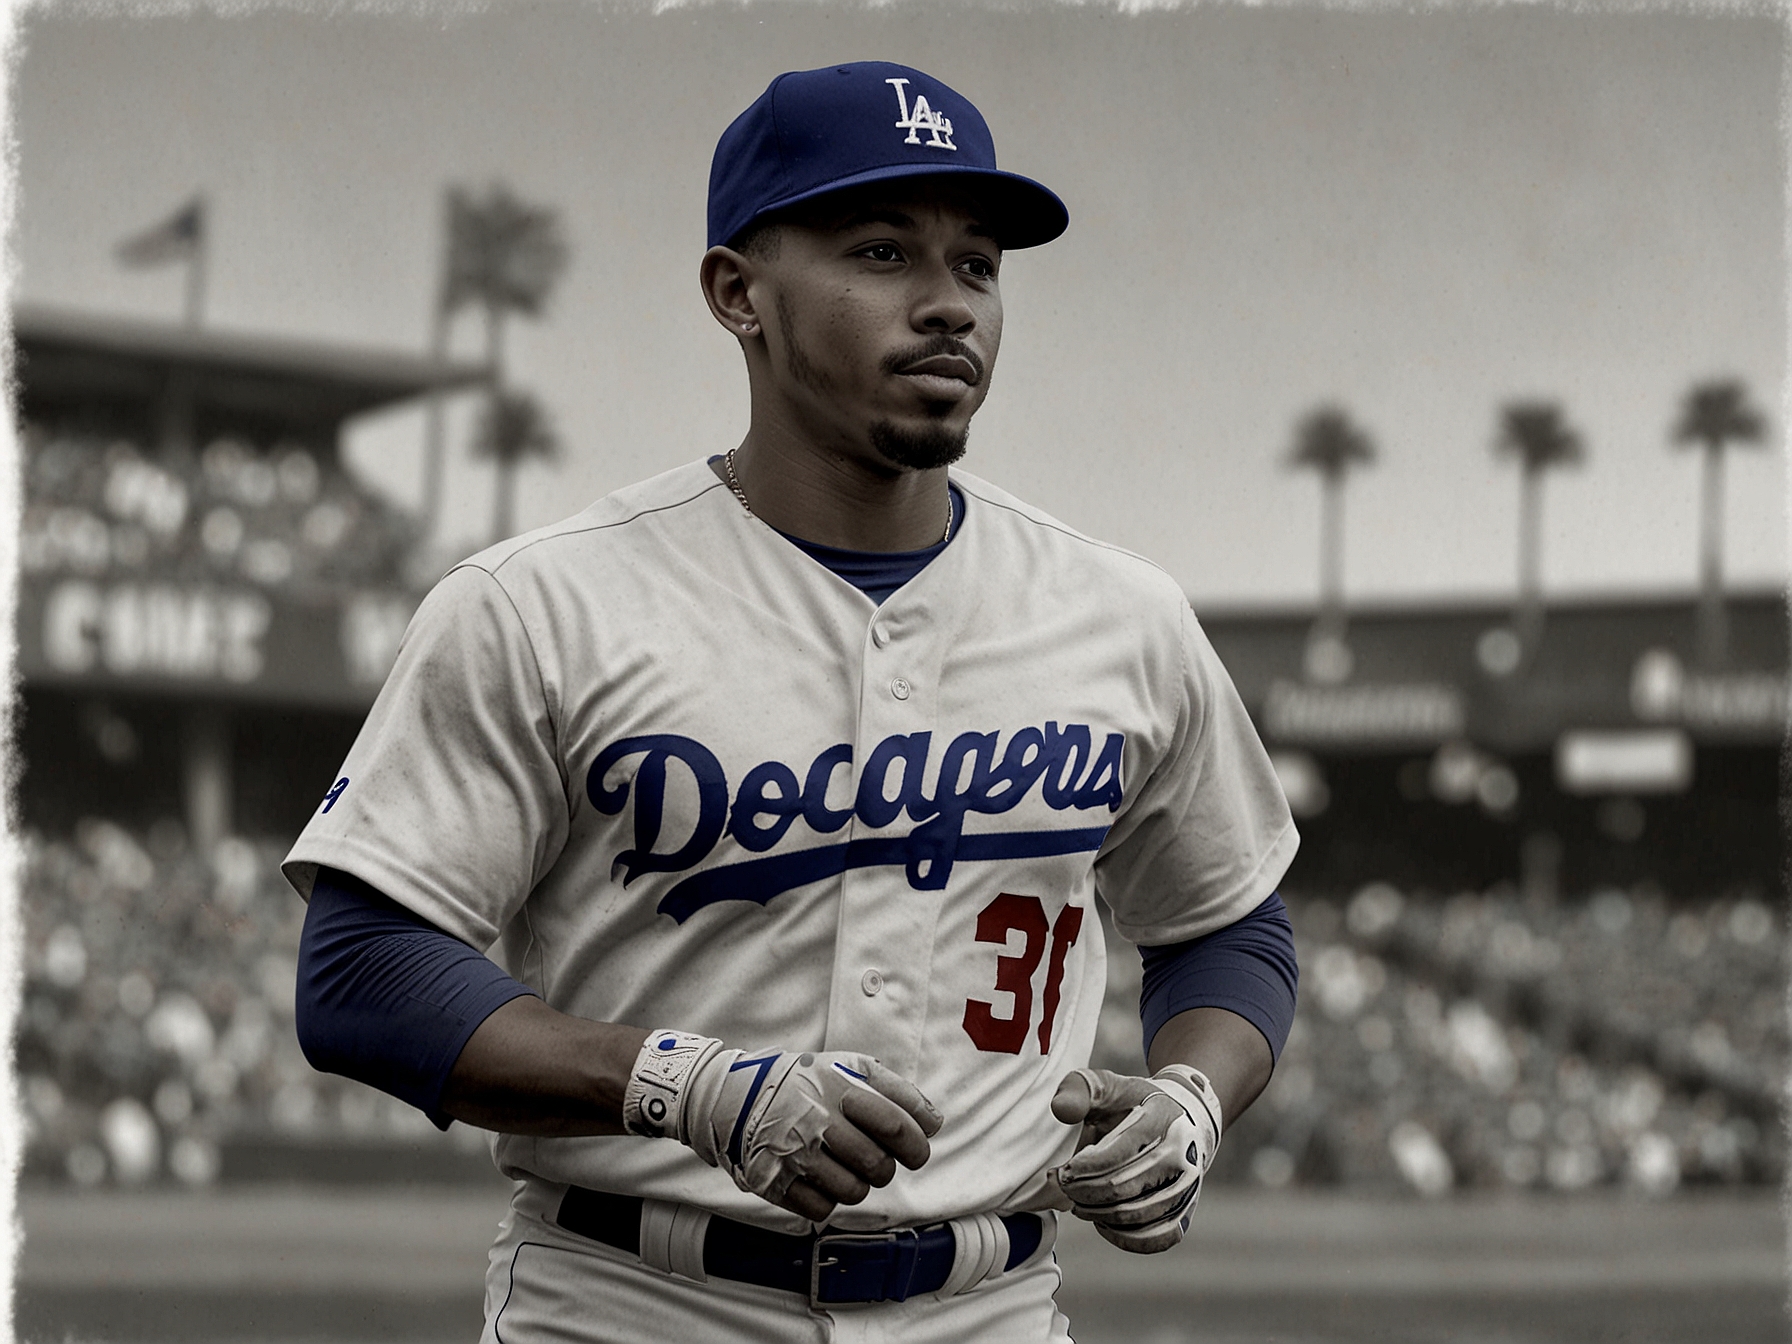 Photo of Mookie Betts on the field in a Dodgers uniform, illustrating his crucial role in the team and the impact of his temporary absence due to injury.